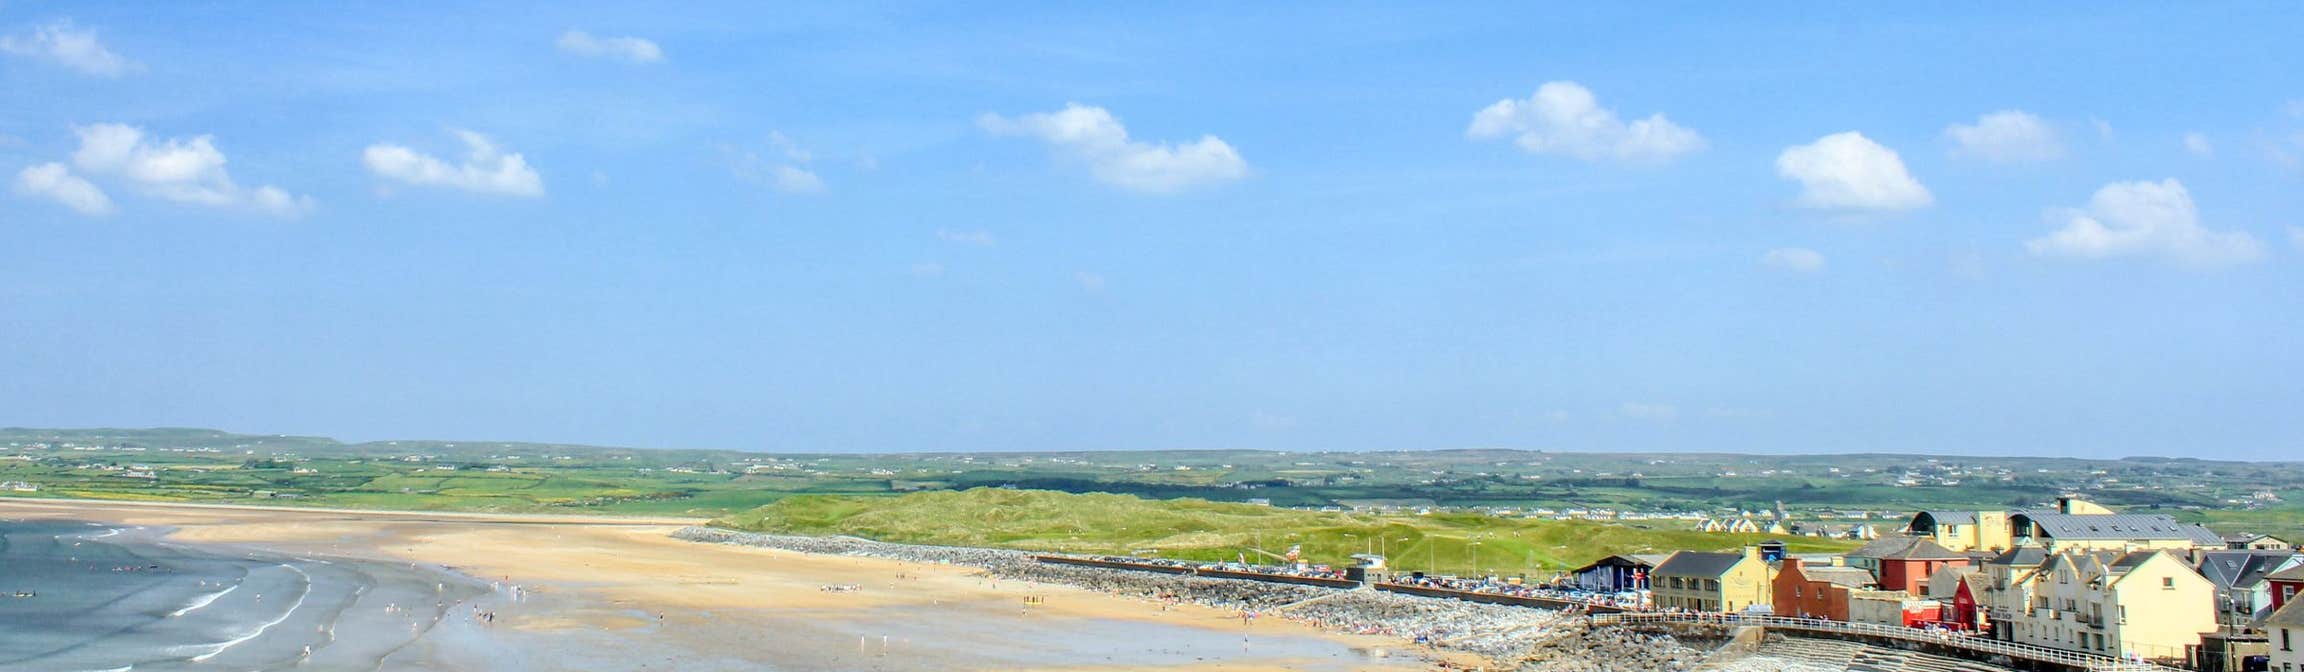 Image of Lahinch Beach in County Clare